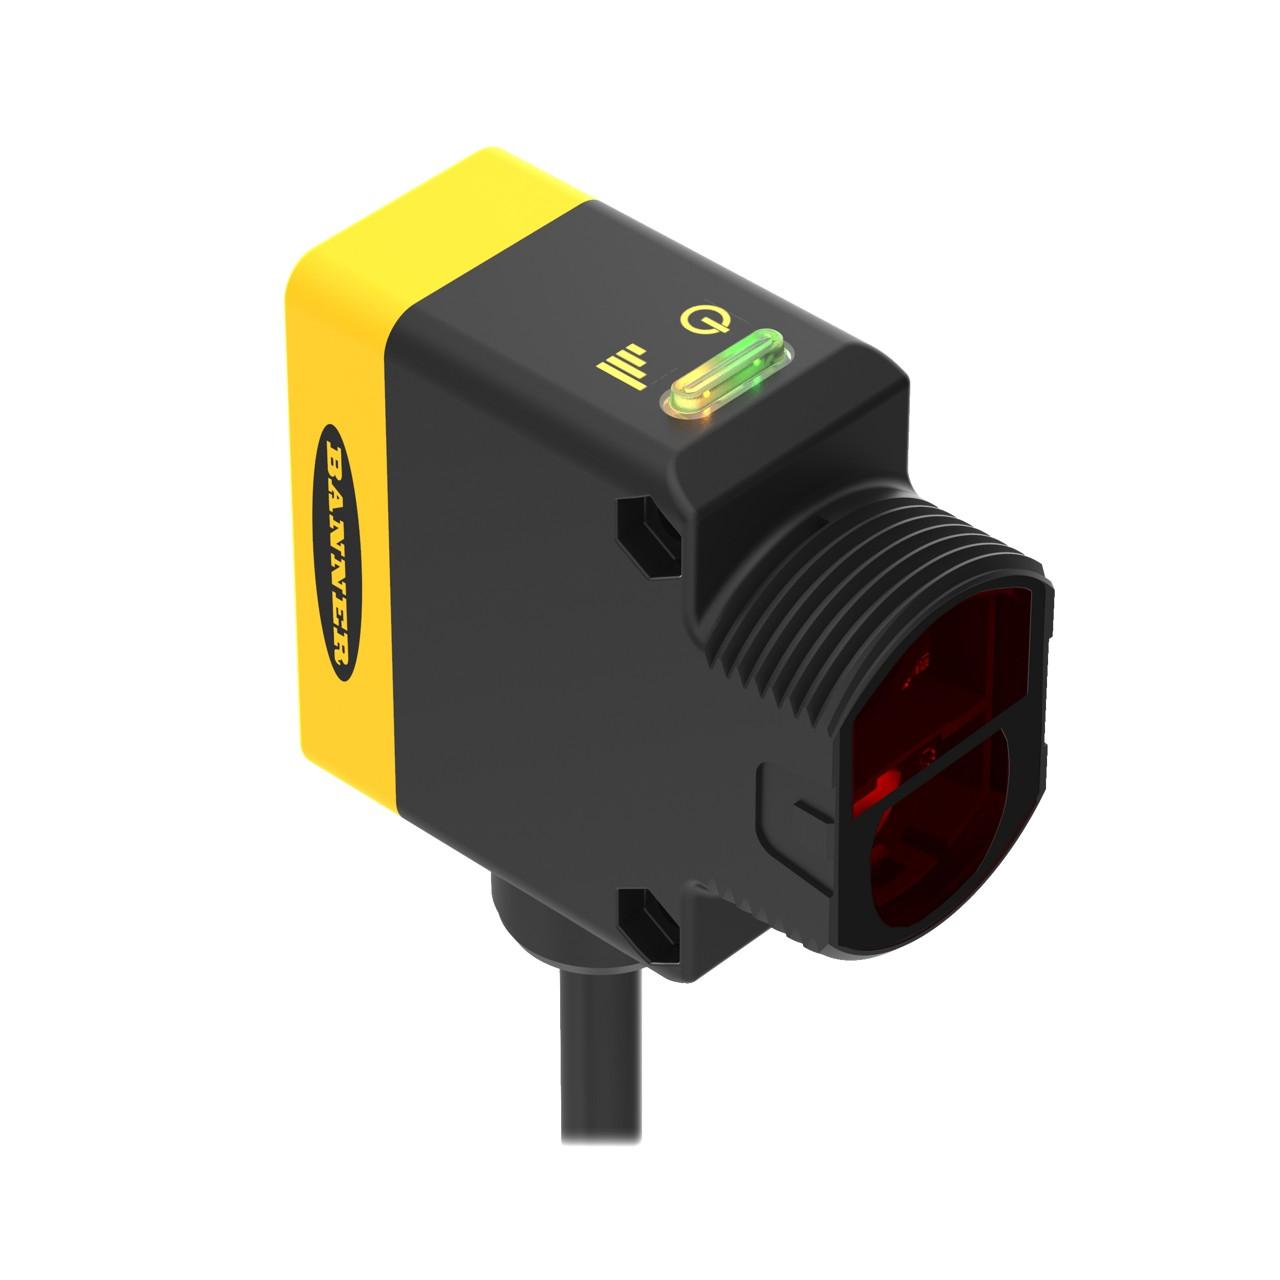 Banner QS30VR3R Photo-electric sensor receiver with through-beam system / opposed mode - Banner Engineering (WORLD-BEAM series - QS30 Universal Voltage Series) - Part #73069 - Sensing range 60m - Infrared (IR) light - 1 x digital output (SPDT contact type) (Light-ON or D